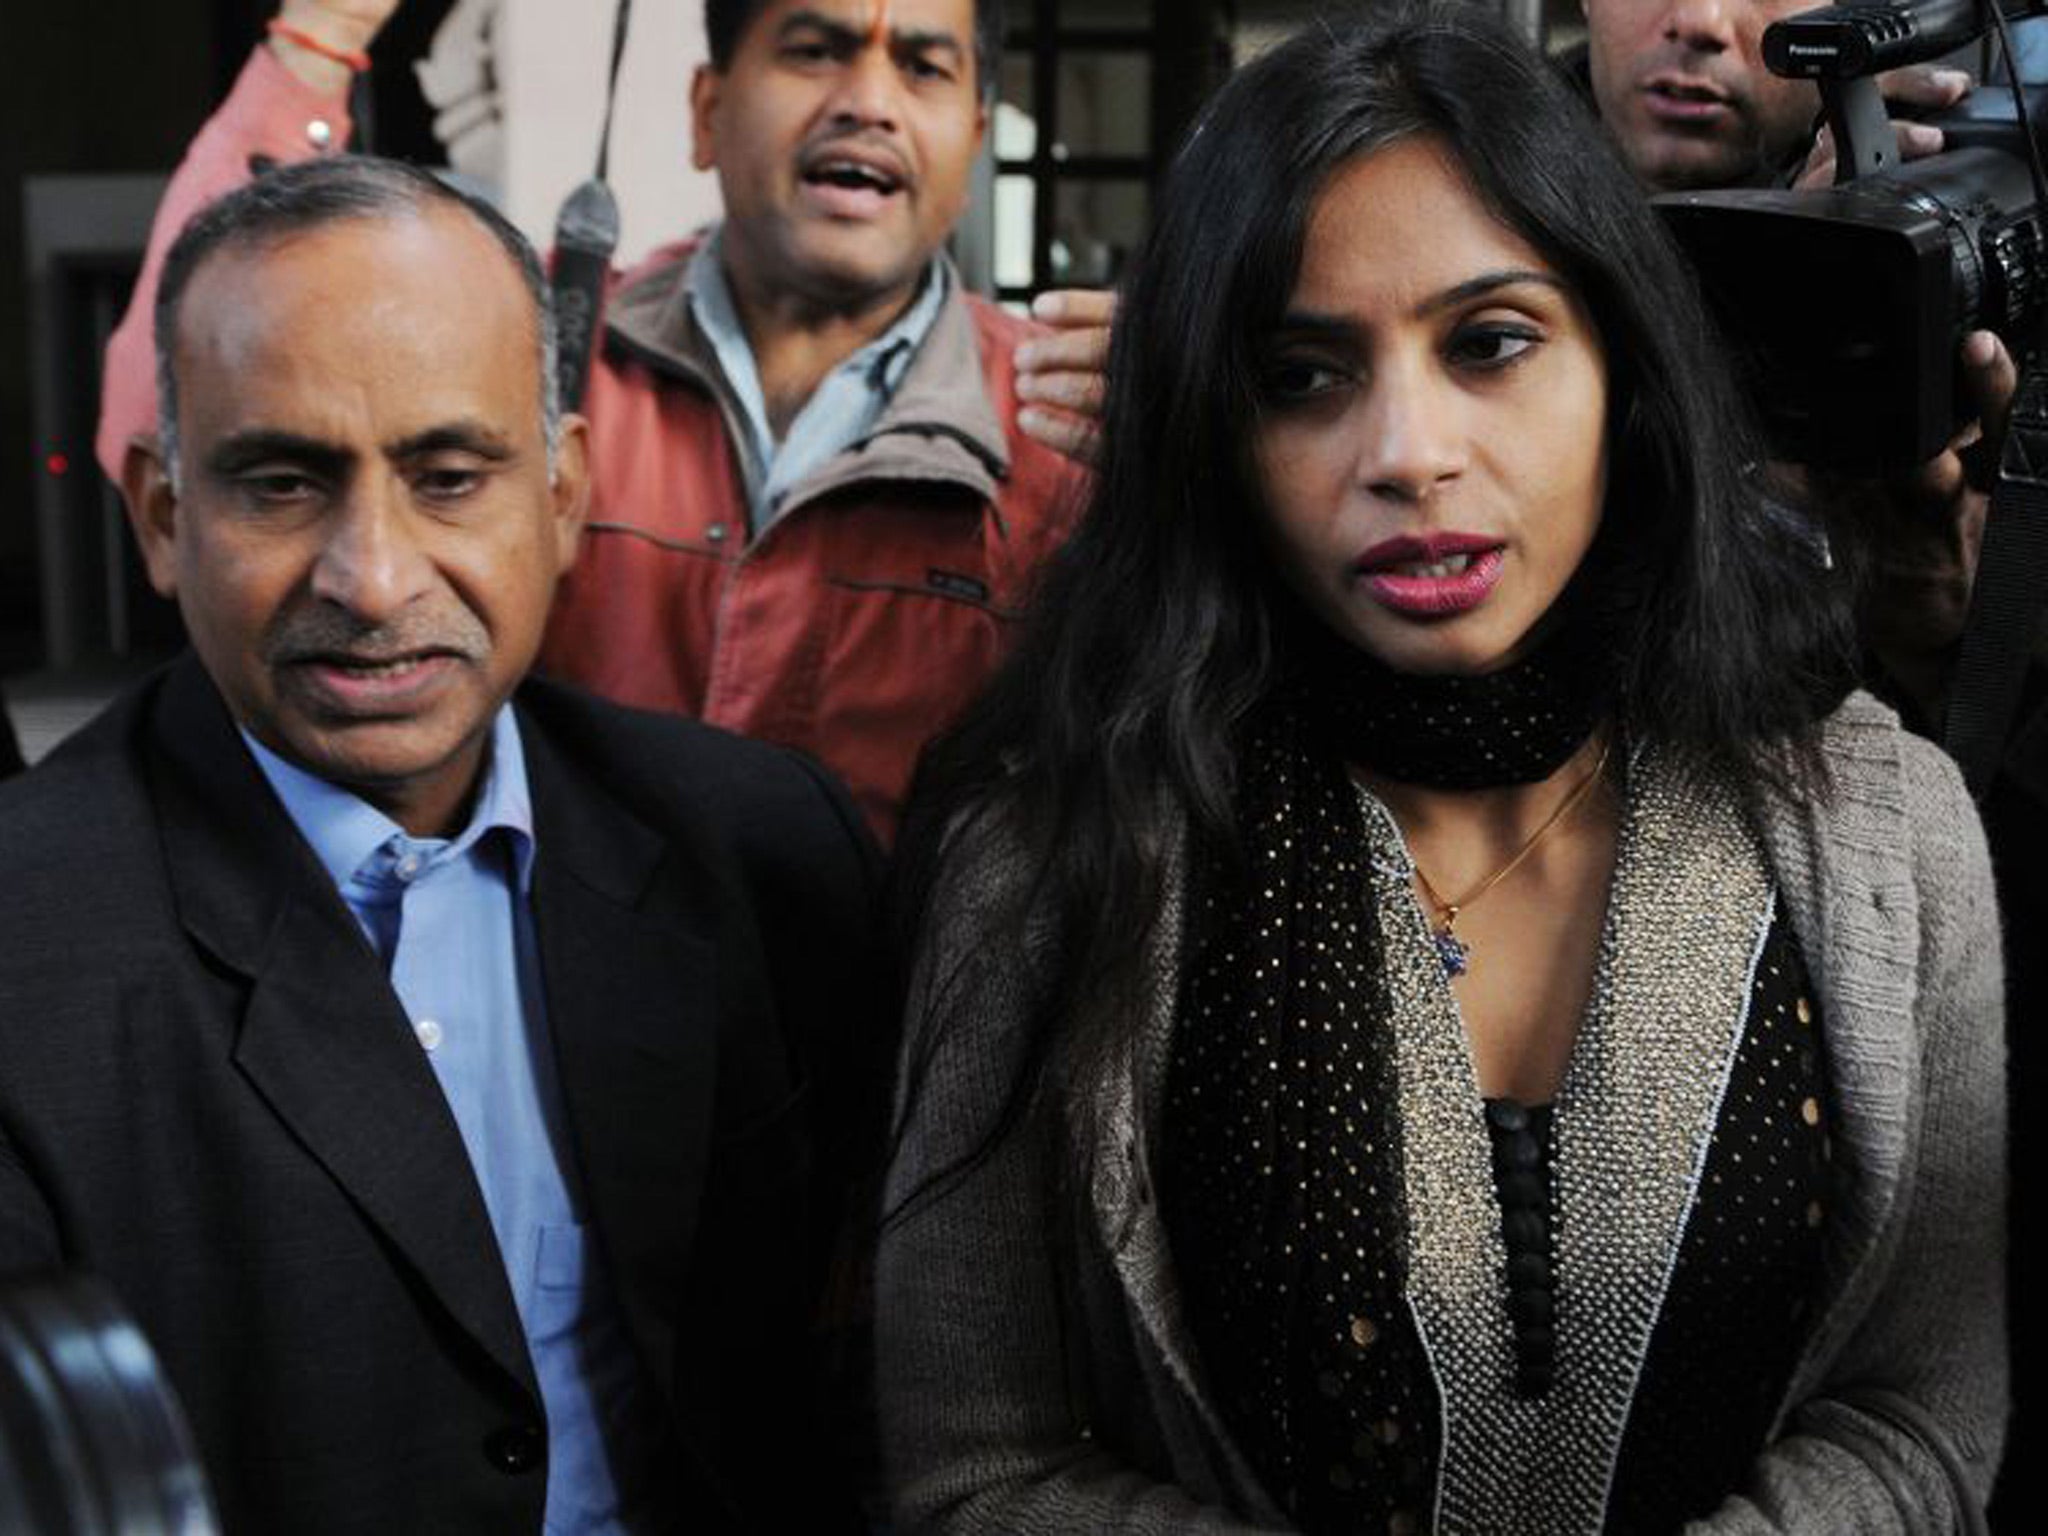 Indian diplomat Devyani Khobragade arrived in New Delhi on Friday night, where she was met by her father (left)